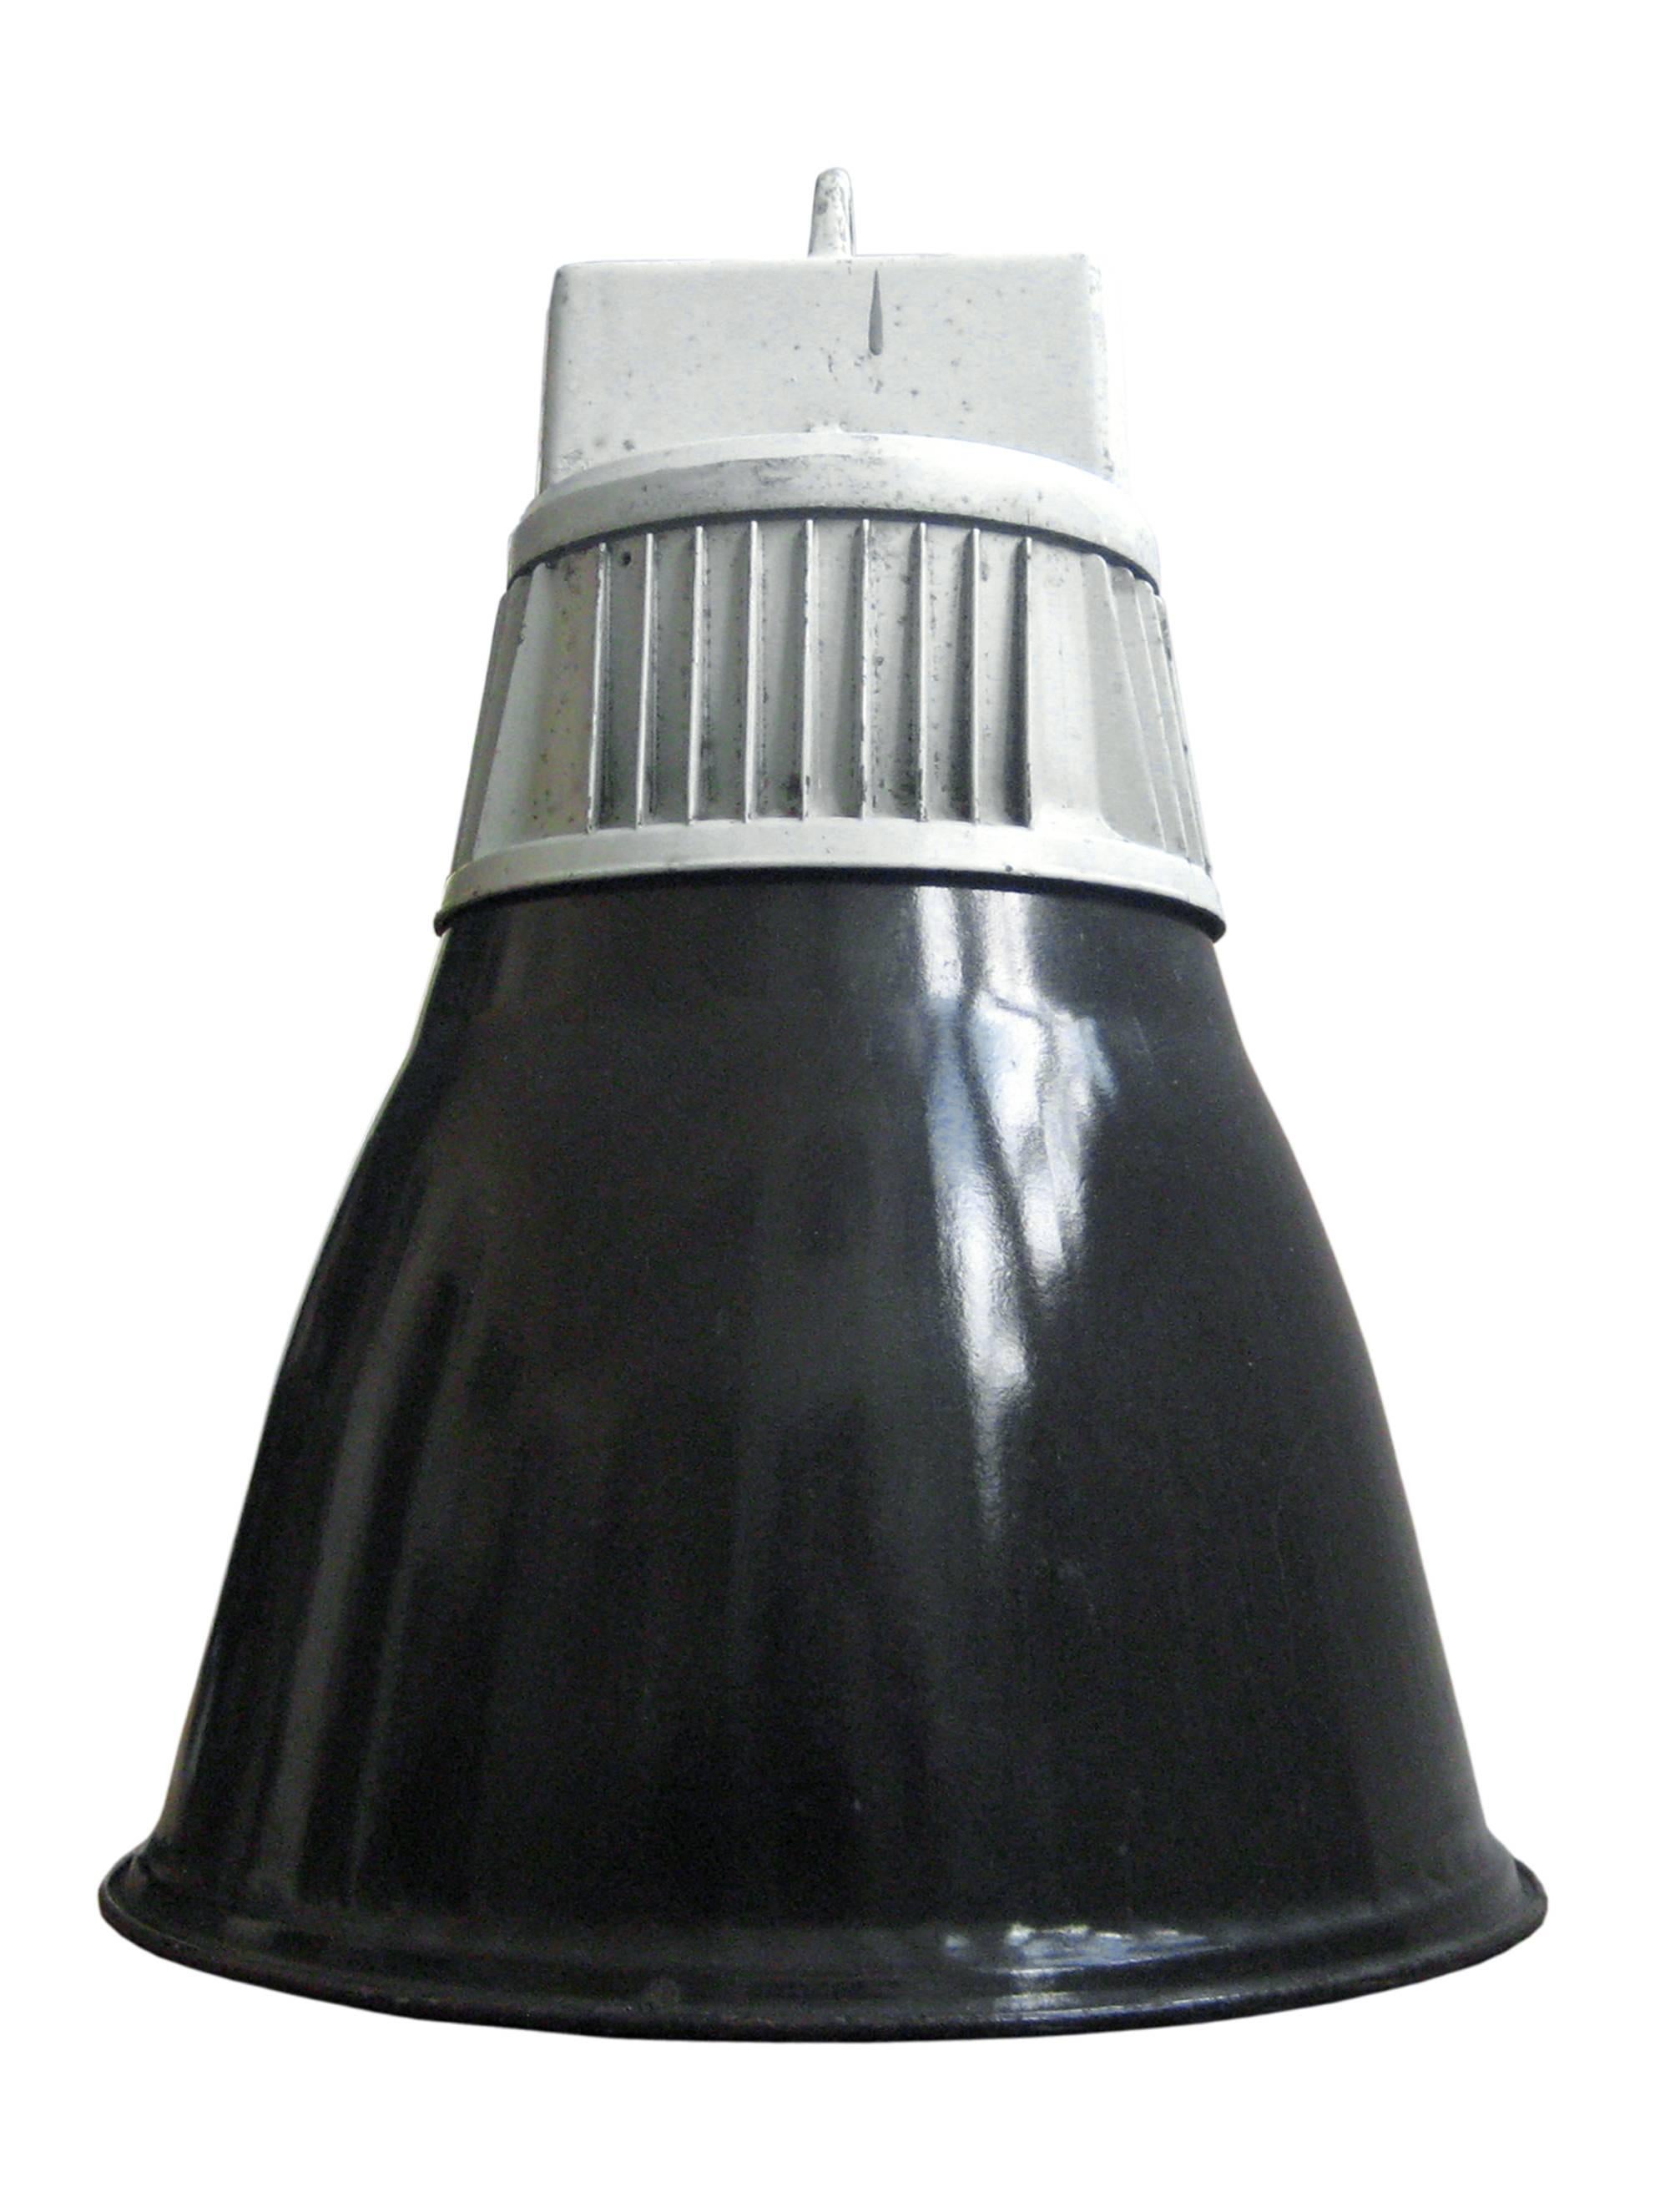 Industrial hanging lamp. Black enamel shade with gray cast aluminium top.

Weight: 5.0 kg / 11 lb

Priced per individual item. All lamps have been made suitable by international standards for incandescent light bulbs, energy-efficient and LED bulbs.